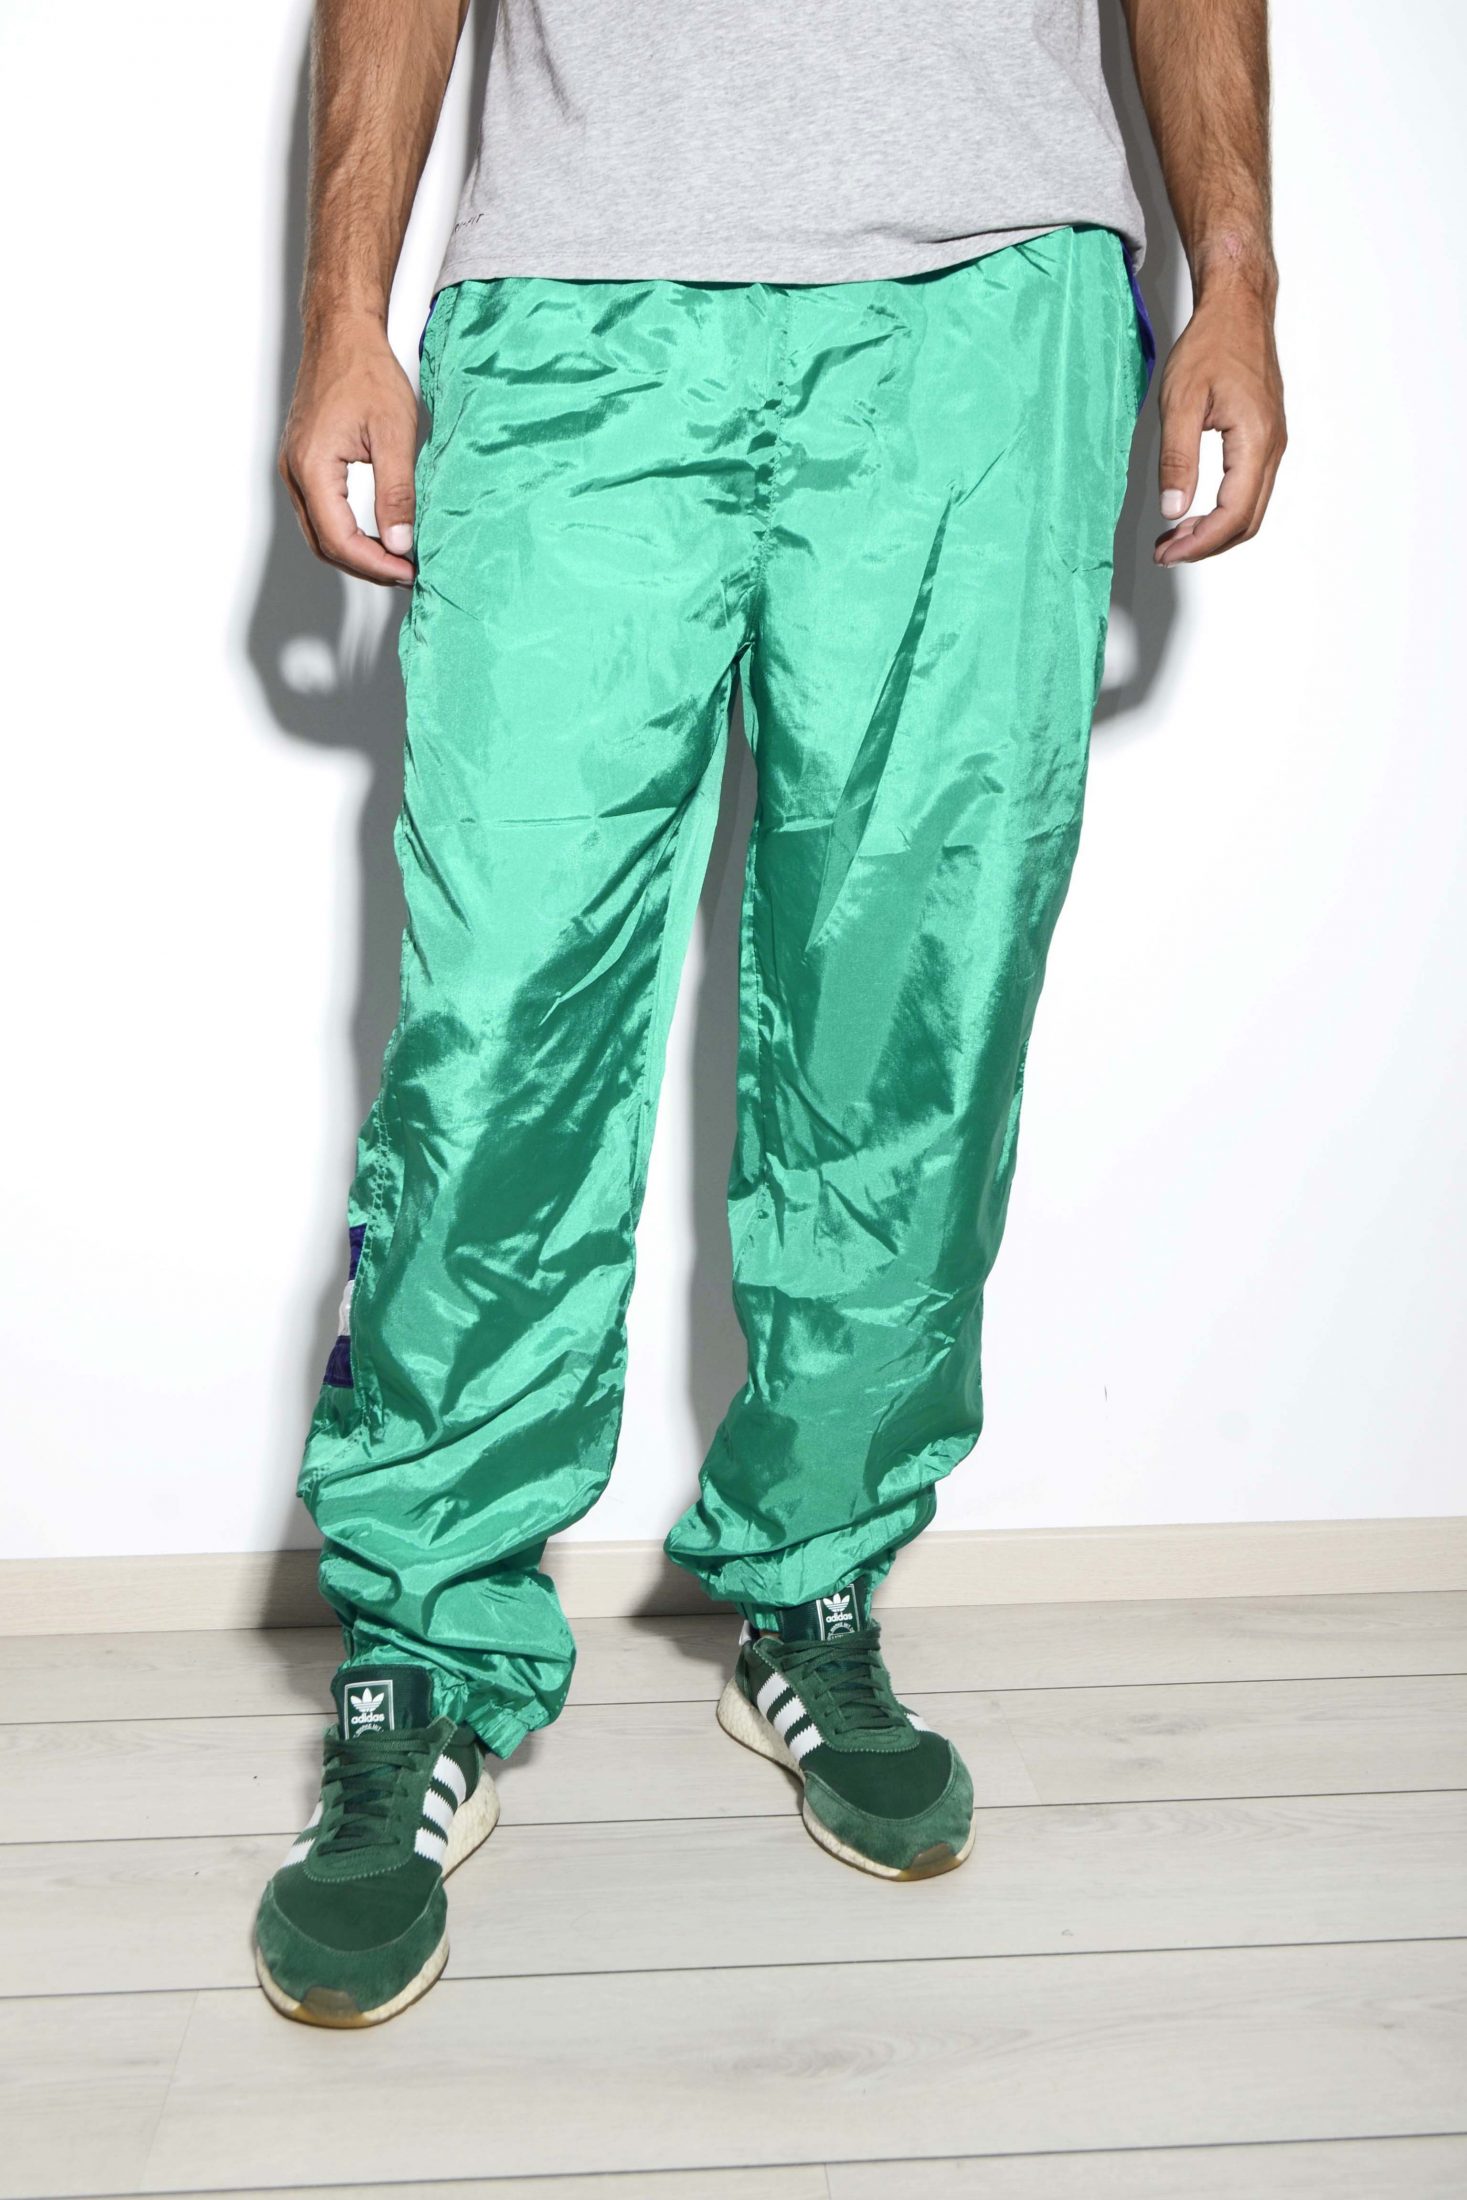 Vintage green shell sport pants | 90s fashion vintage sport clothes in EU